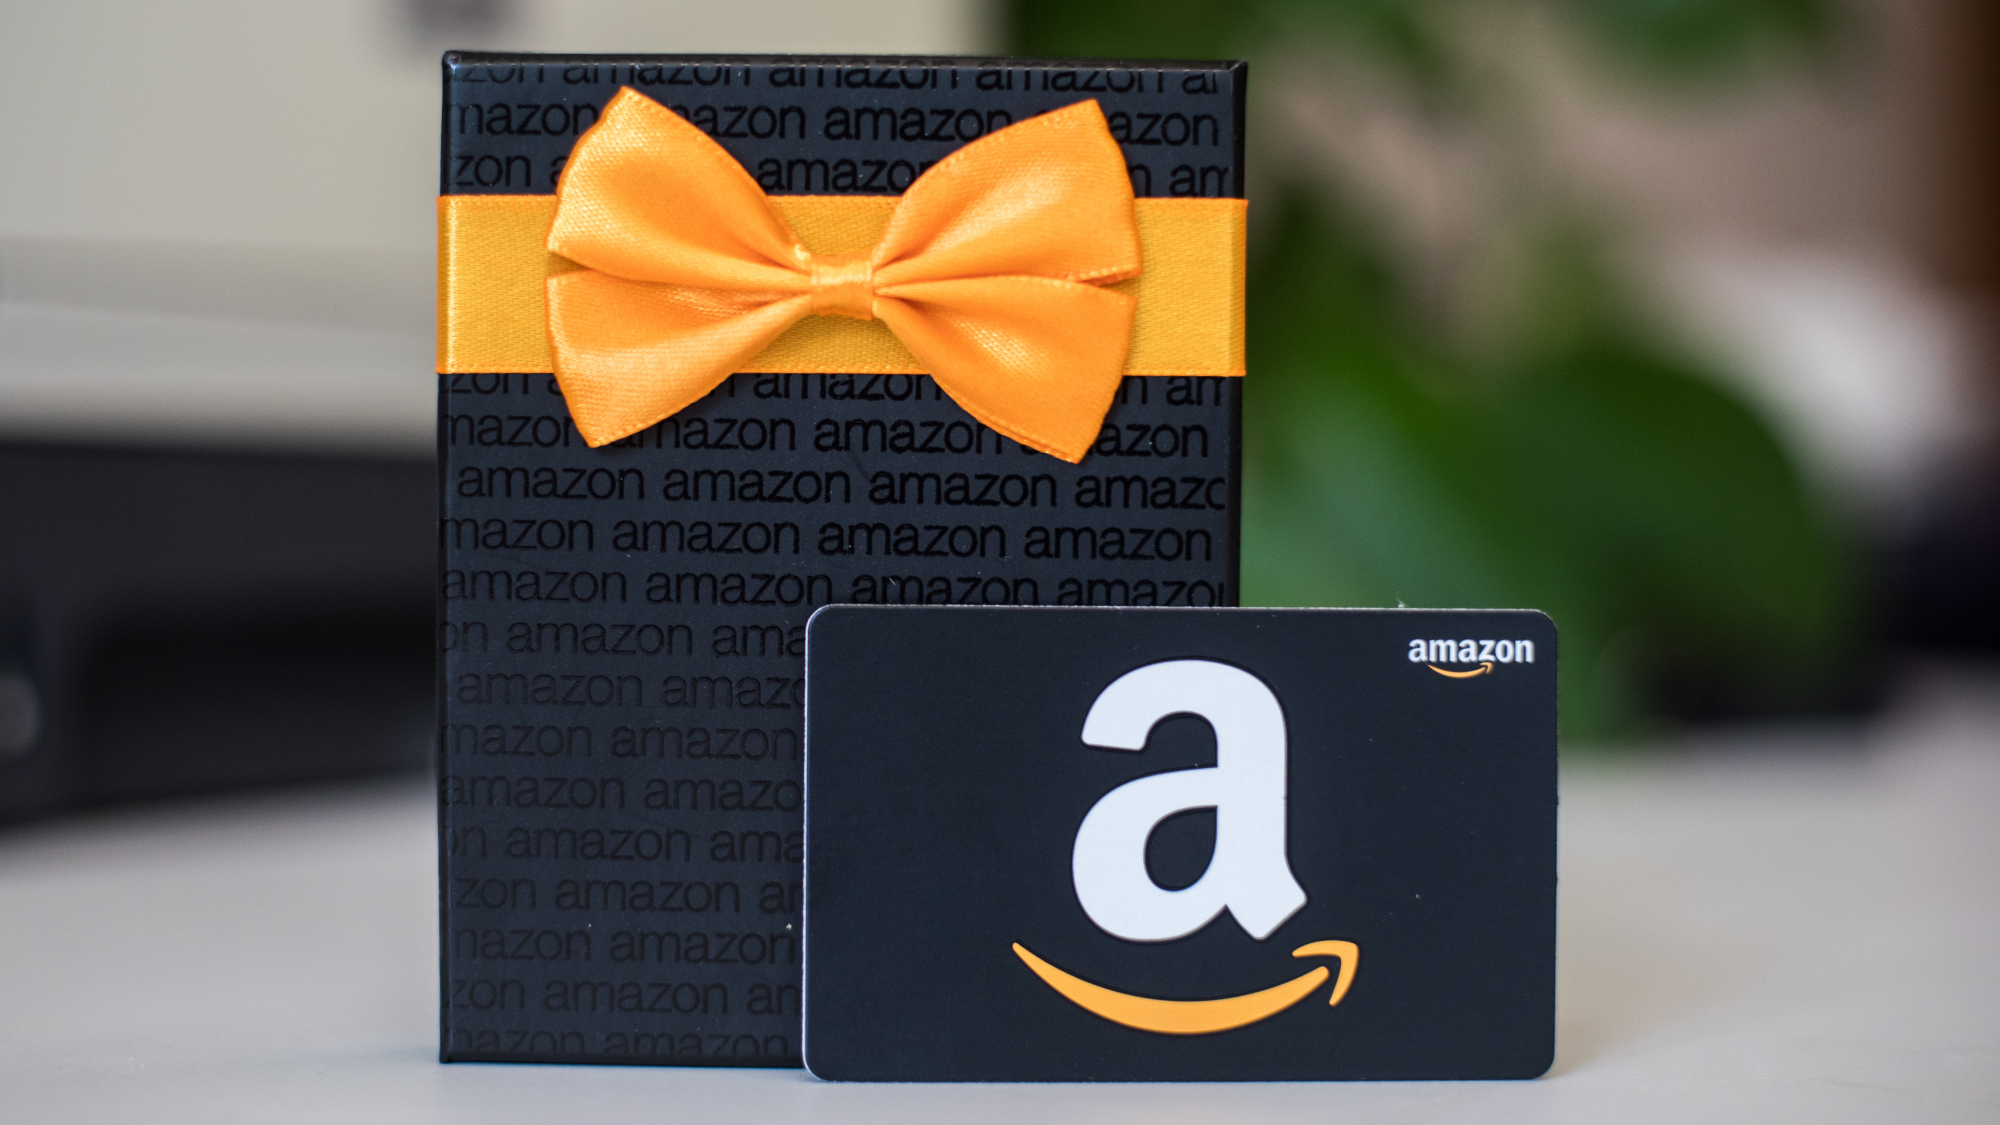 is giving away a free £5 voucher — here's how to get your gift card